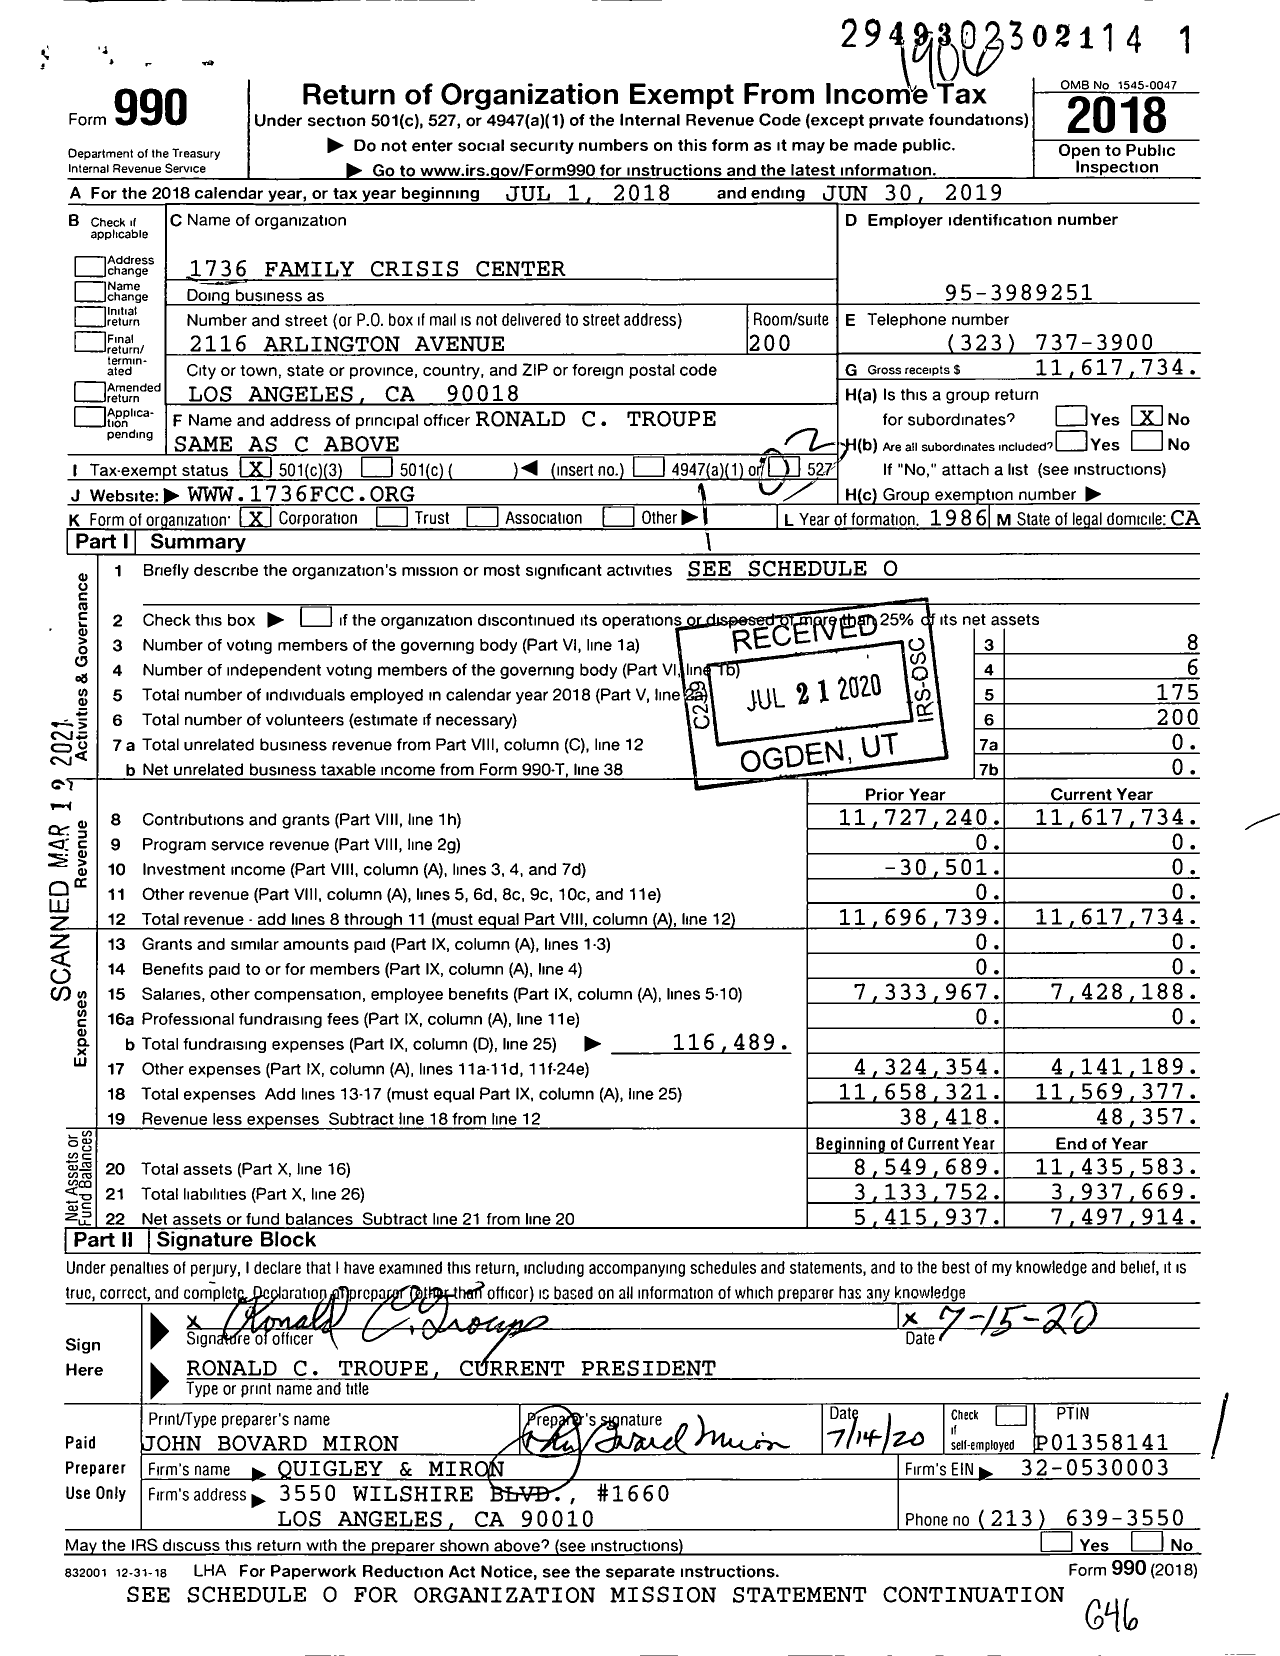 Image of first page of 2018 Form 990 for 1736 Family Crisis Center (1736 FCC)